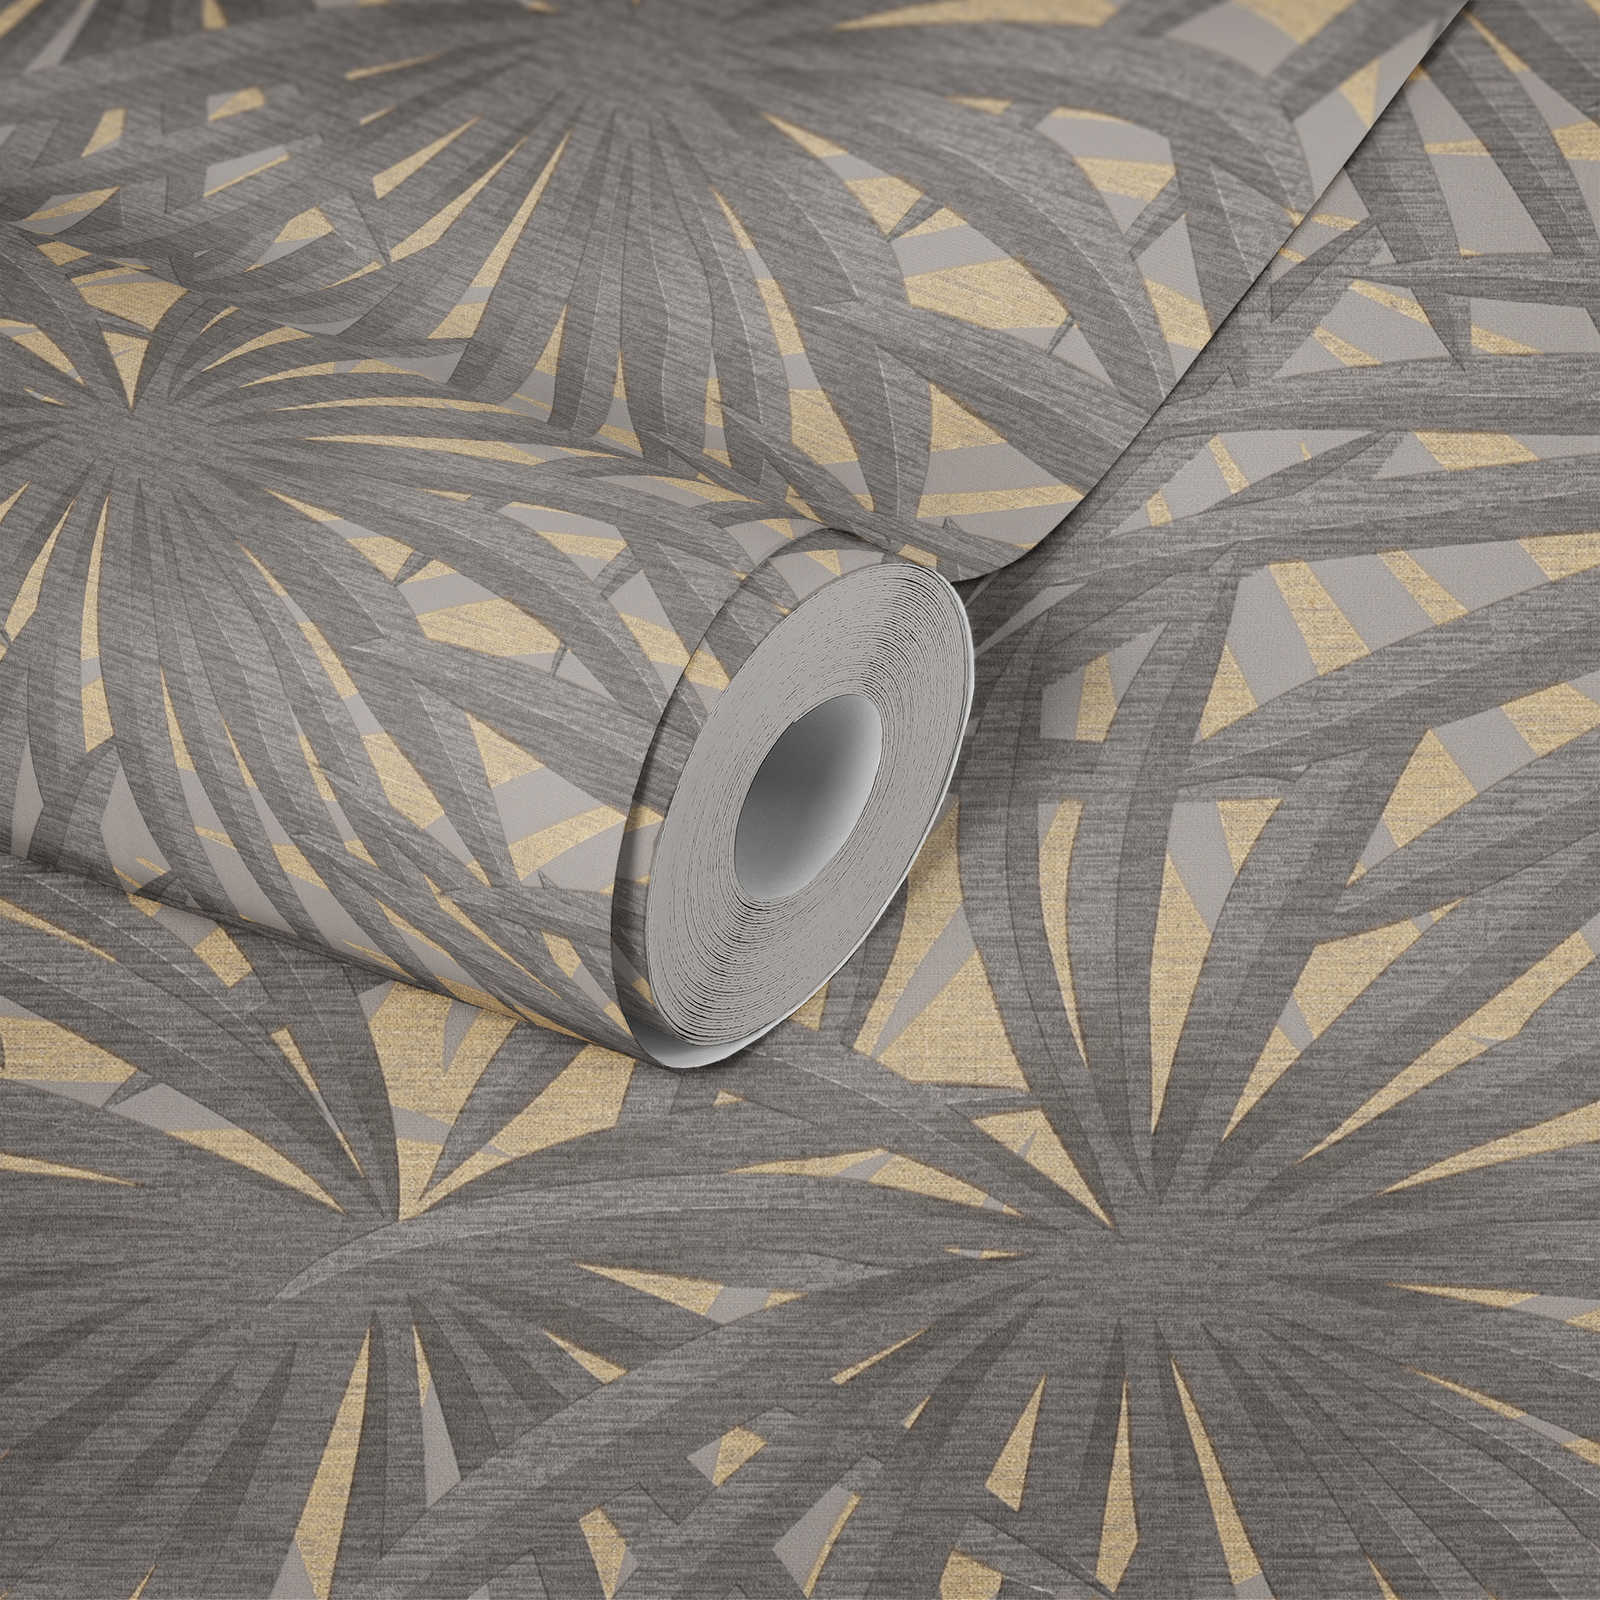             Wallpaper with leaf pattern and metallic accents - grey, metallic
        